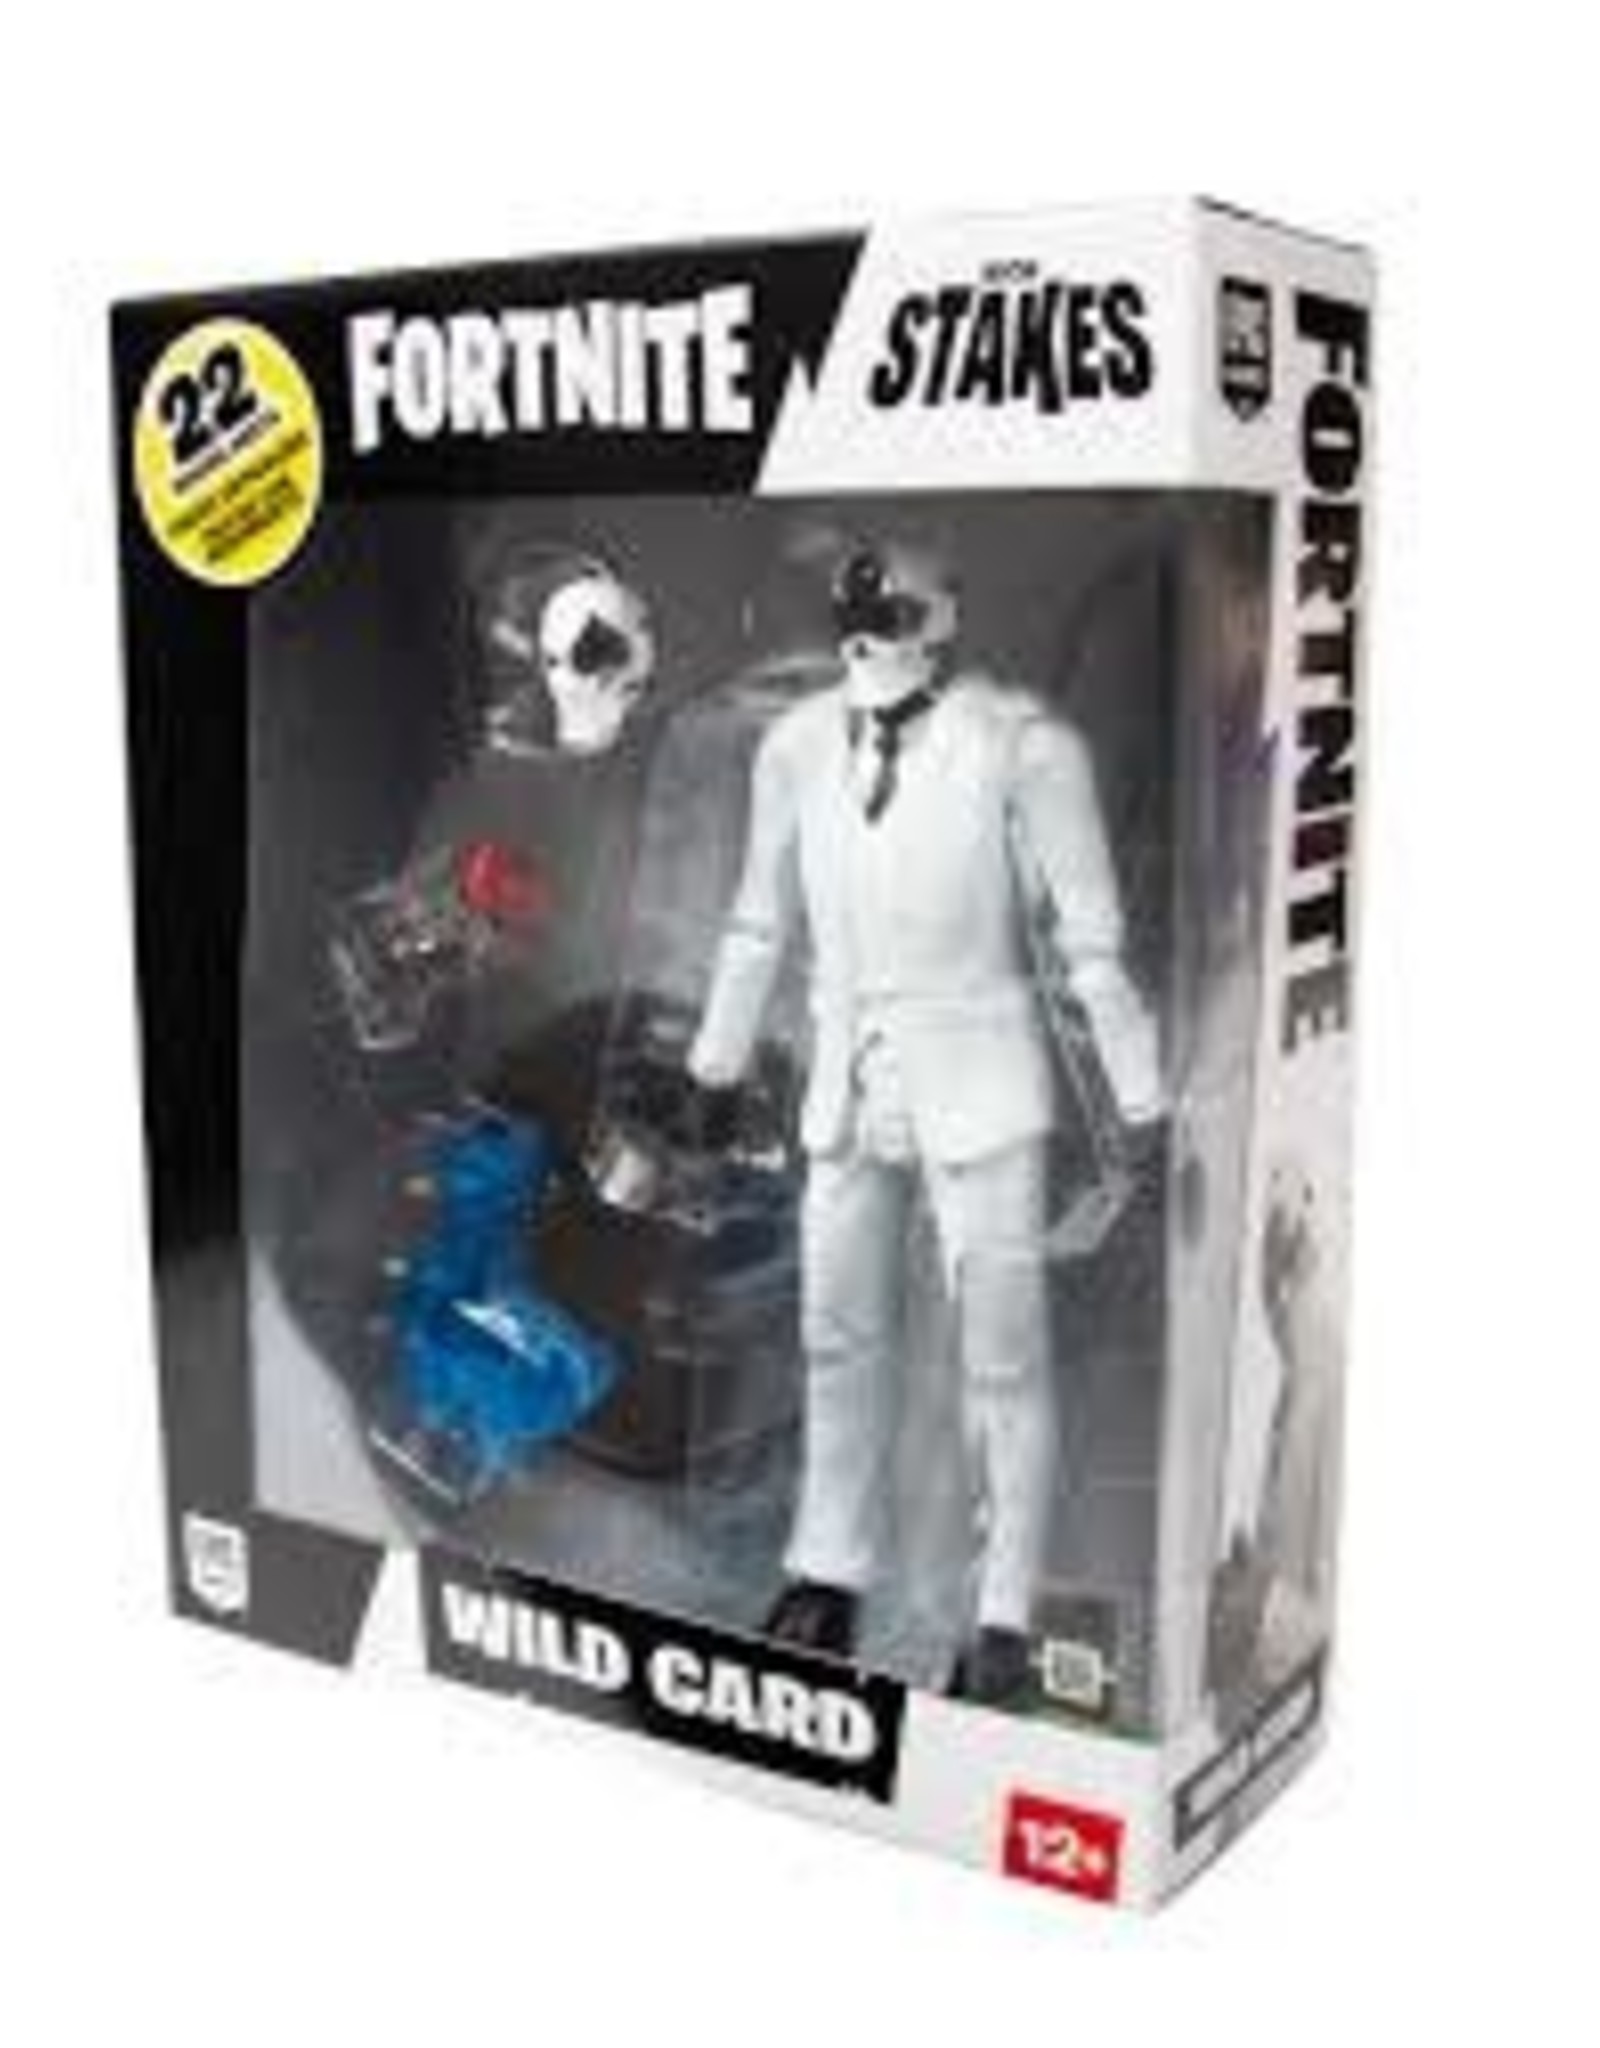 Epic Games Fortnite Wild Card Clubs/Spades Action Figure